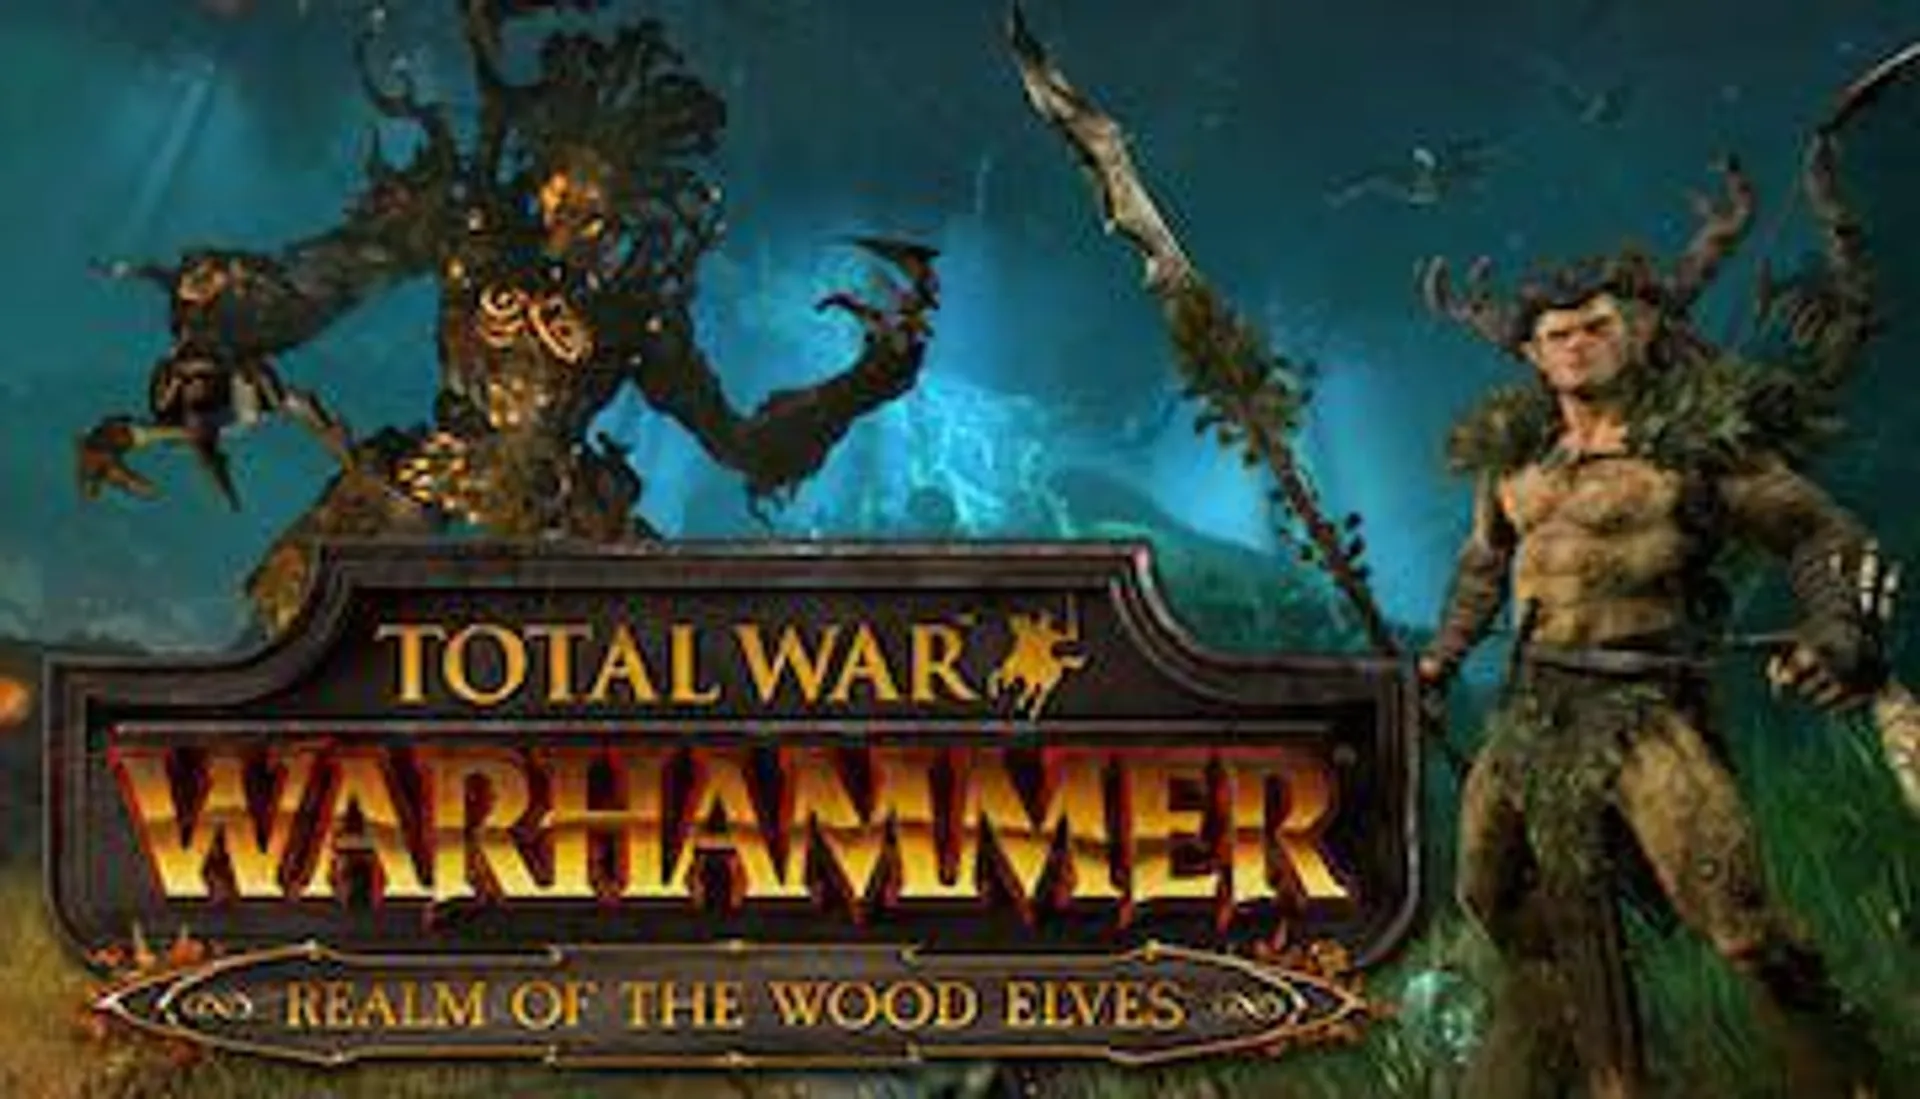 Total War™: WARHAMMER® - Realm Of The Wood Elves